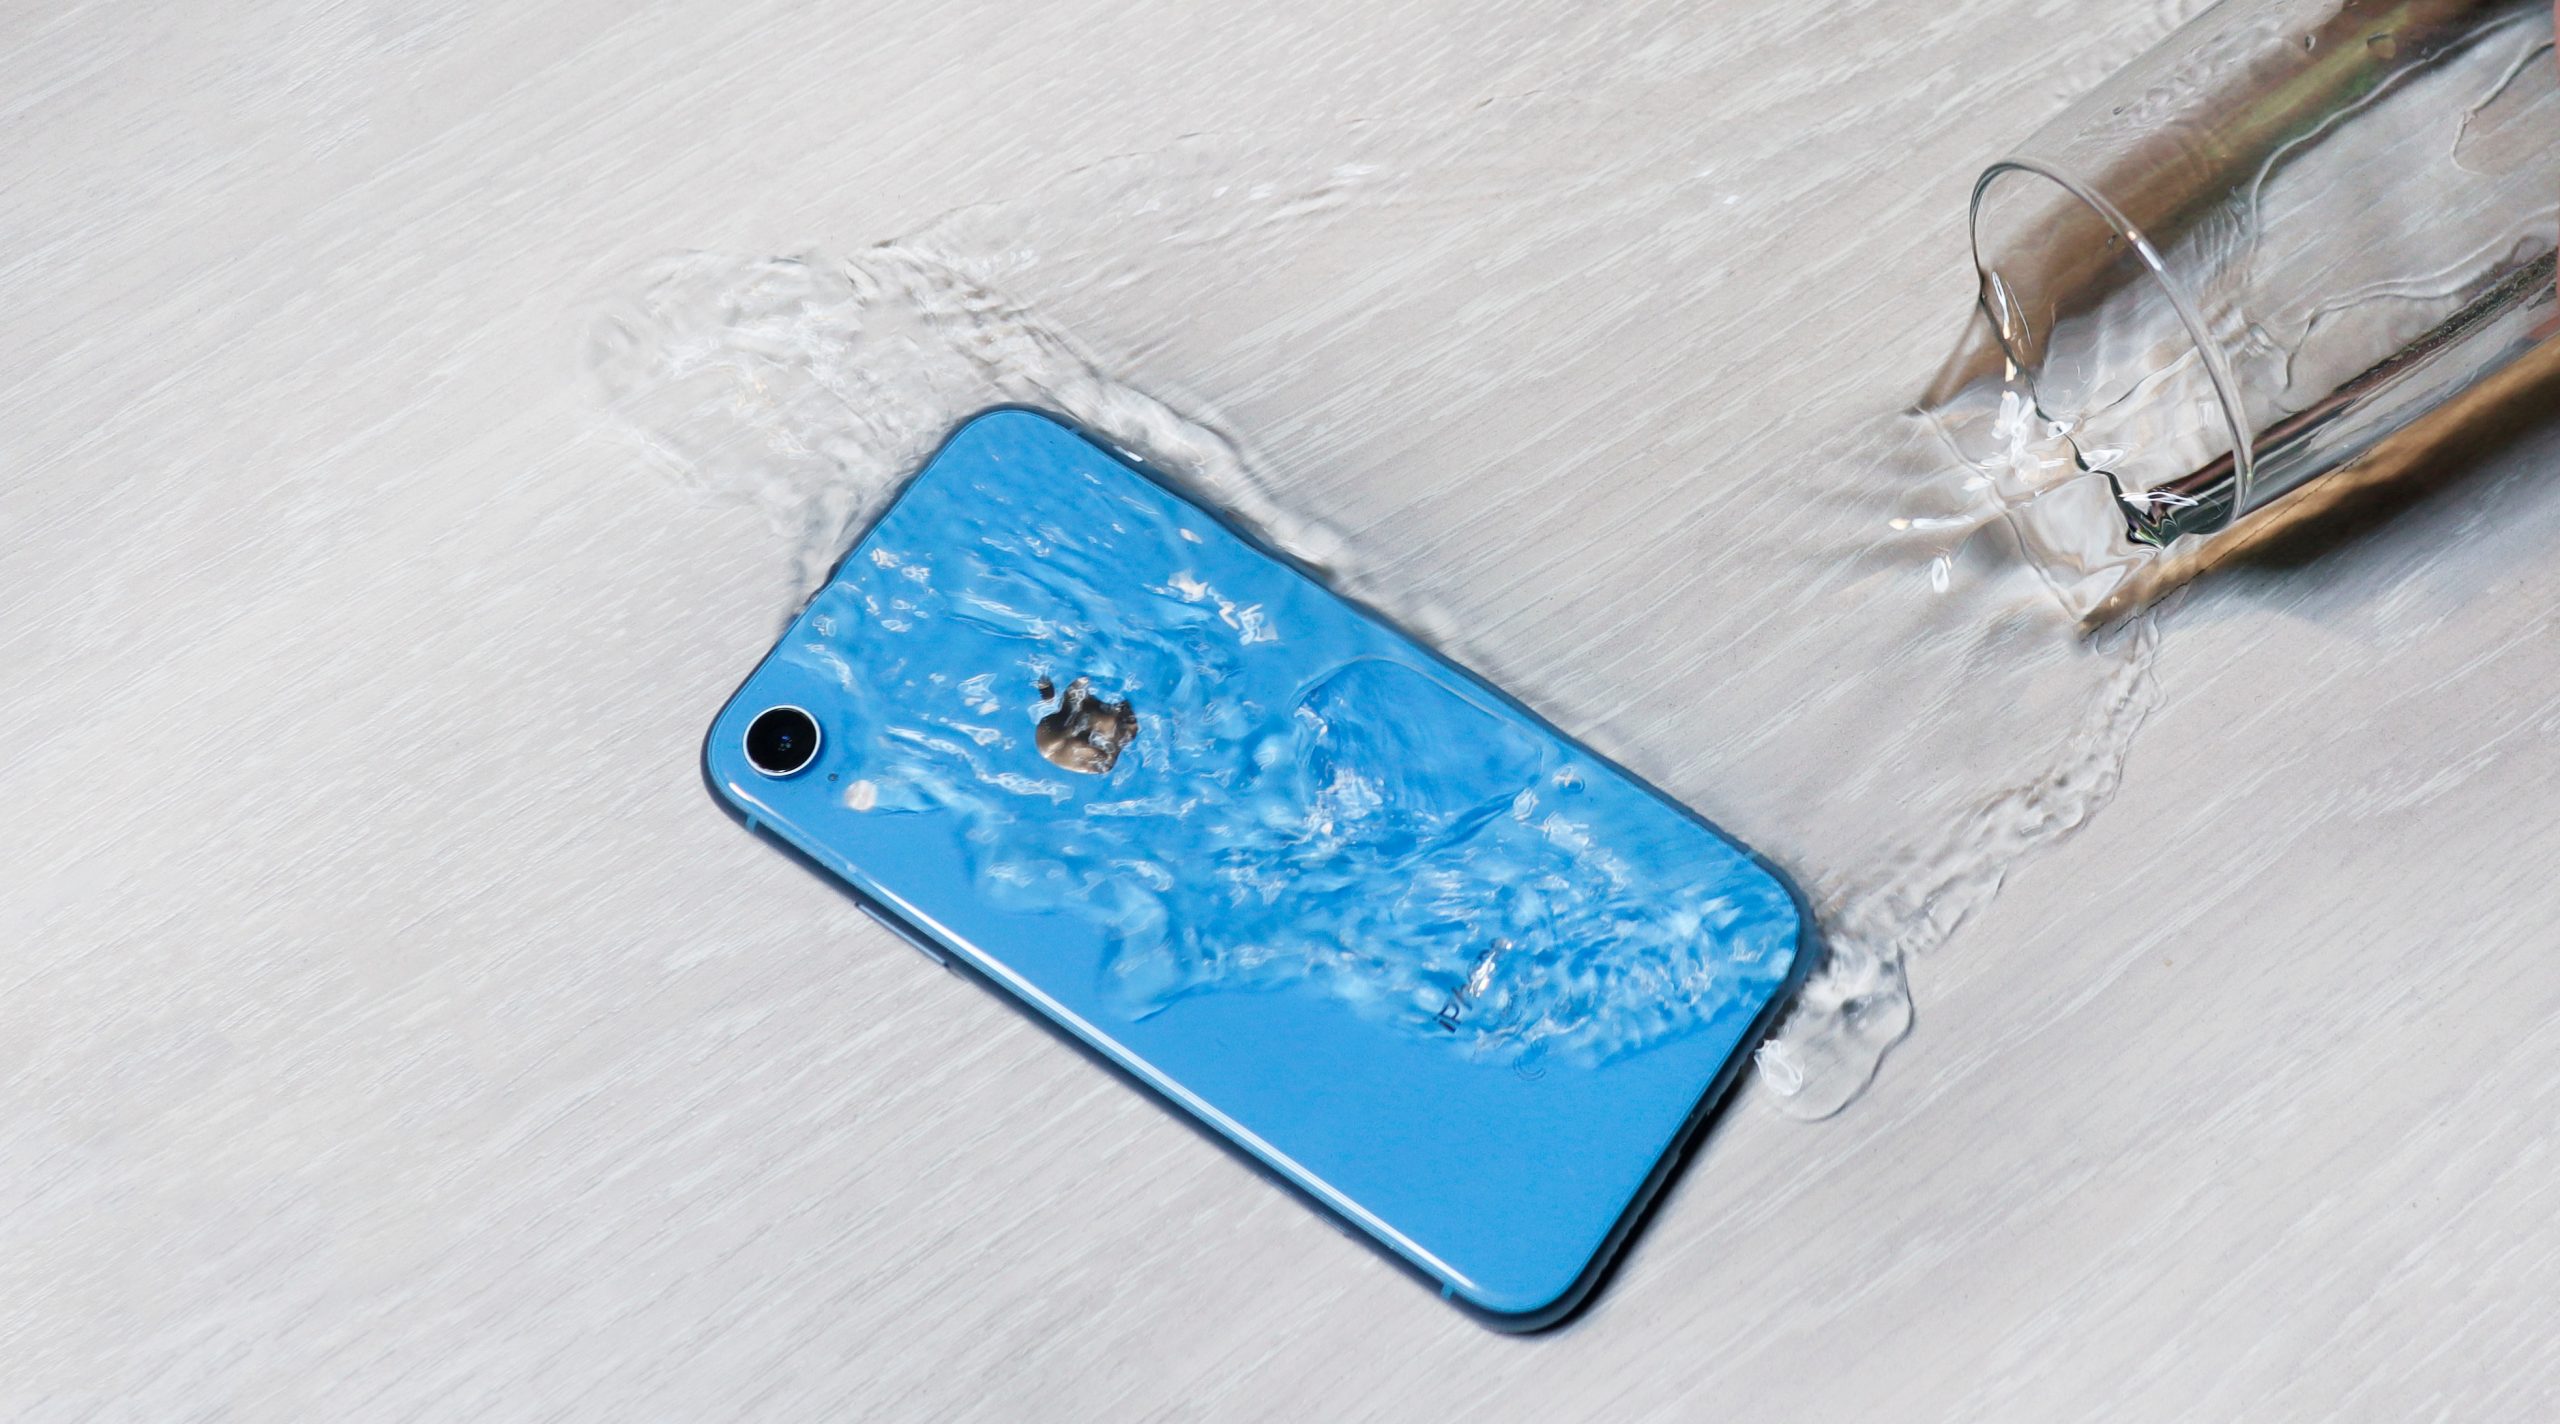 Release Water Out Of Your Phone